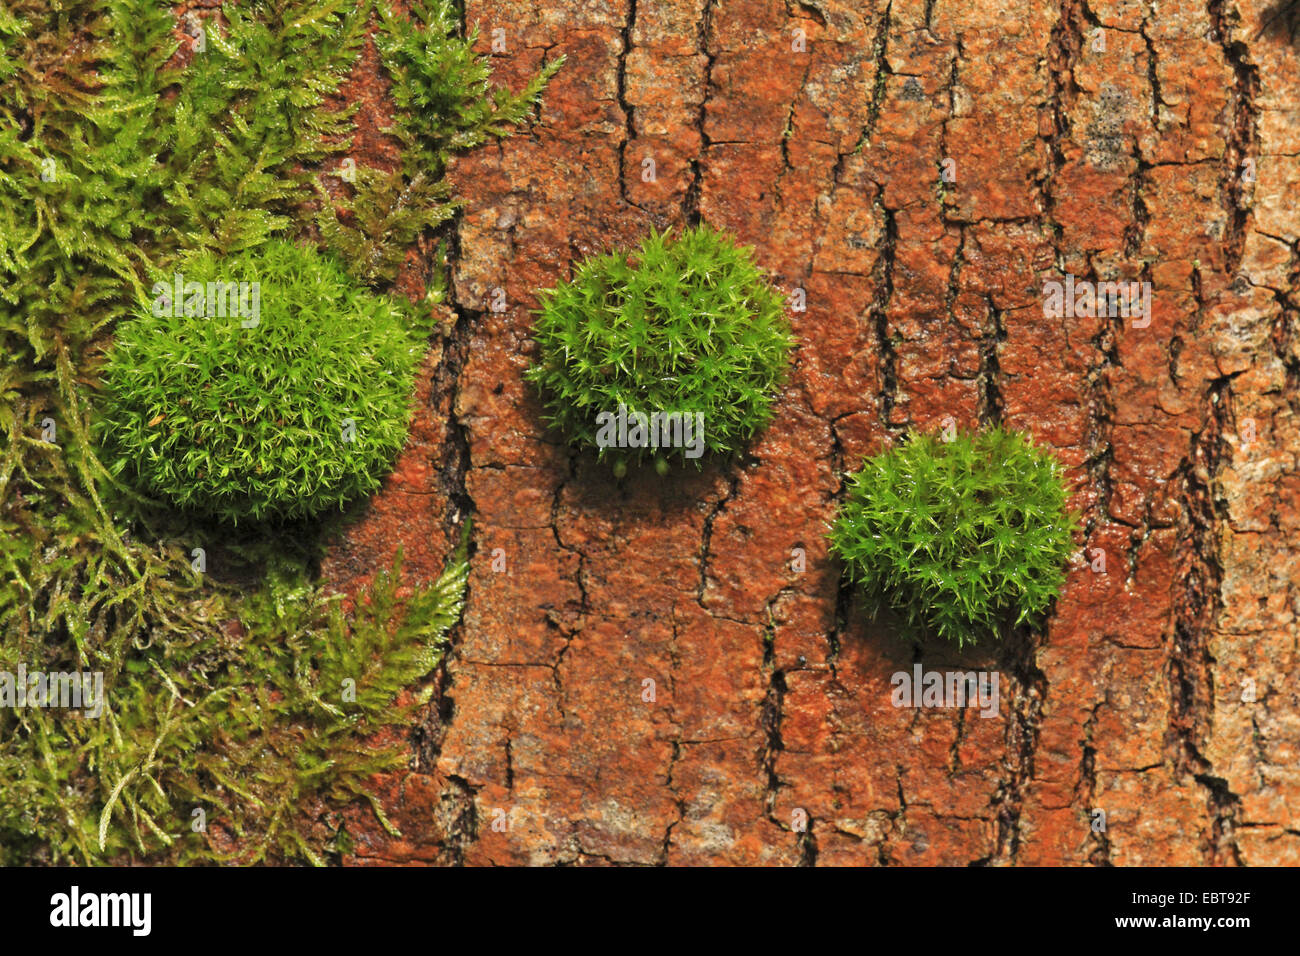 Orthotrichum Moss (Orthotrichum affine), at a tree trunk, Germany, Baden-Wuerttemberg Stock Photo